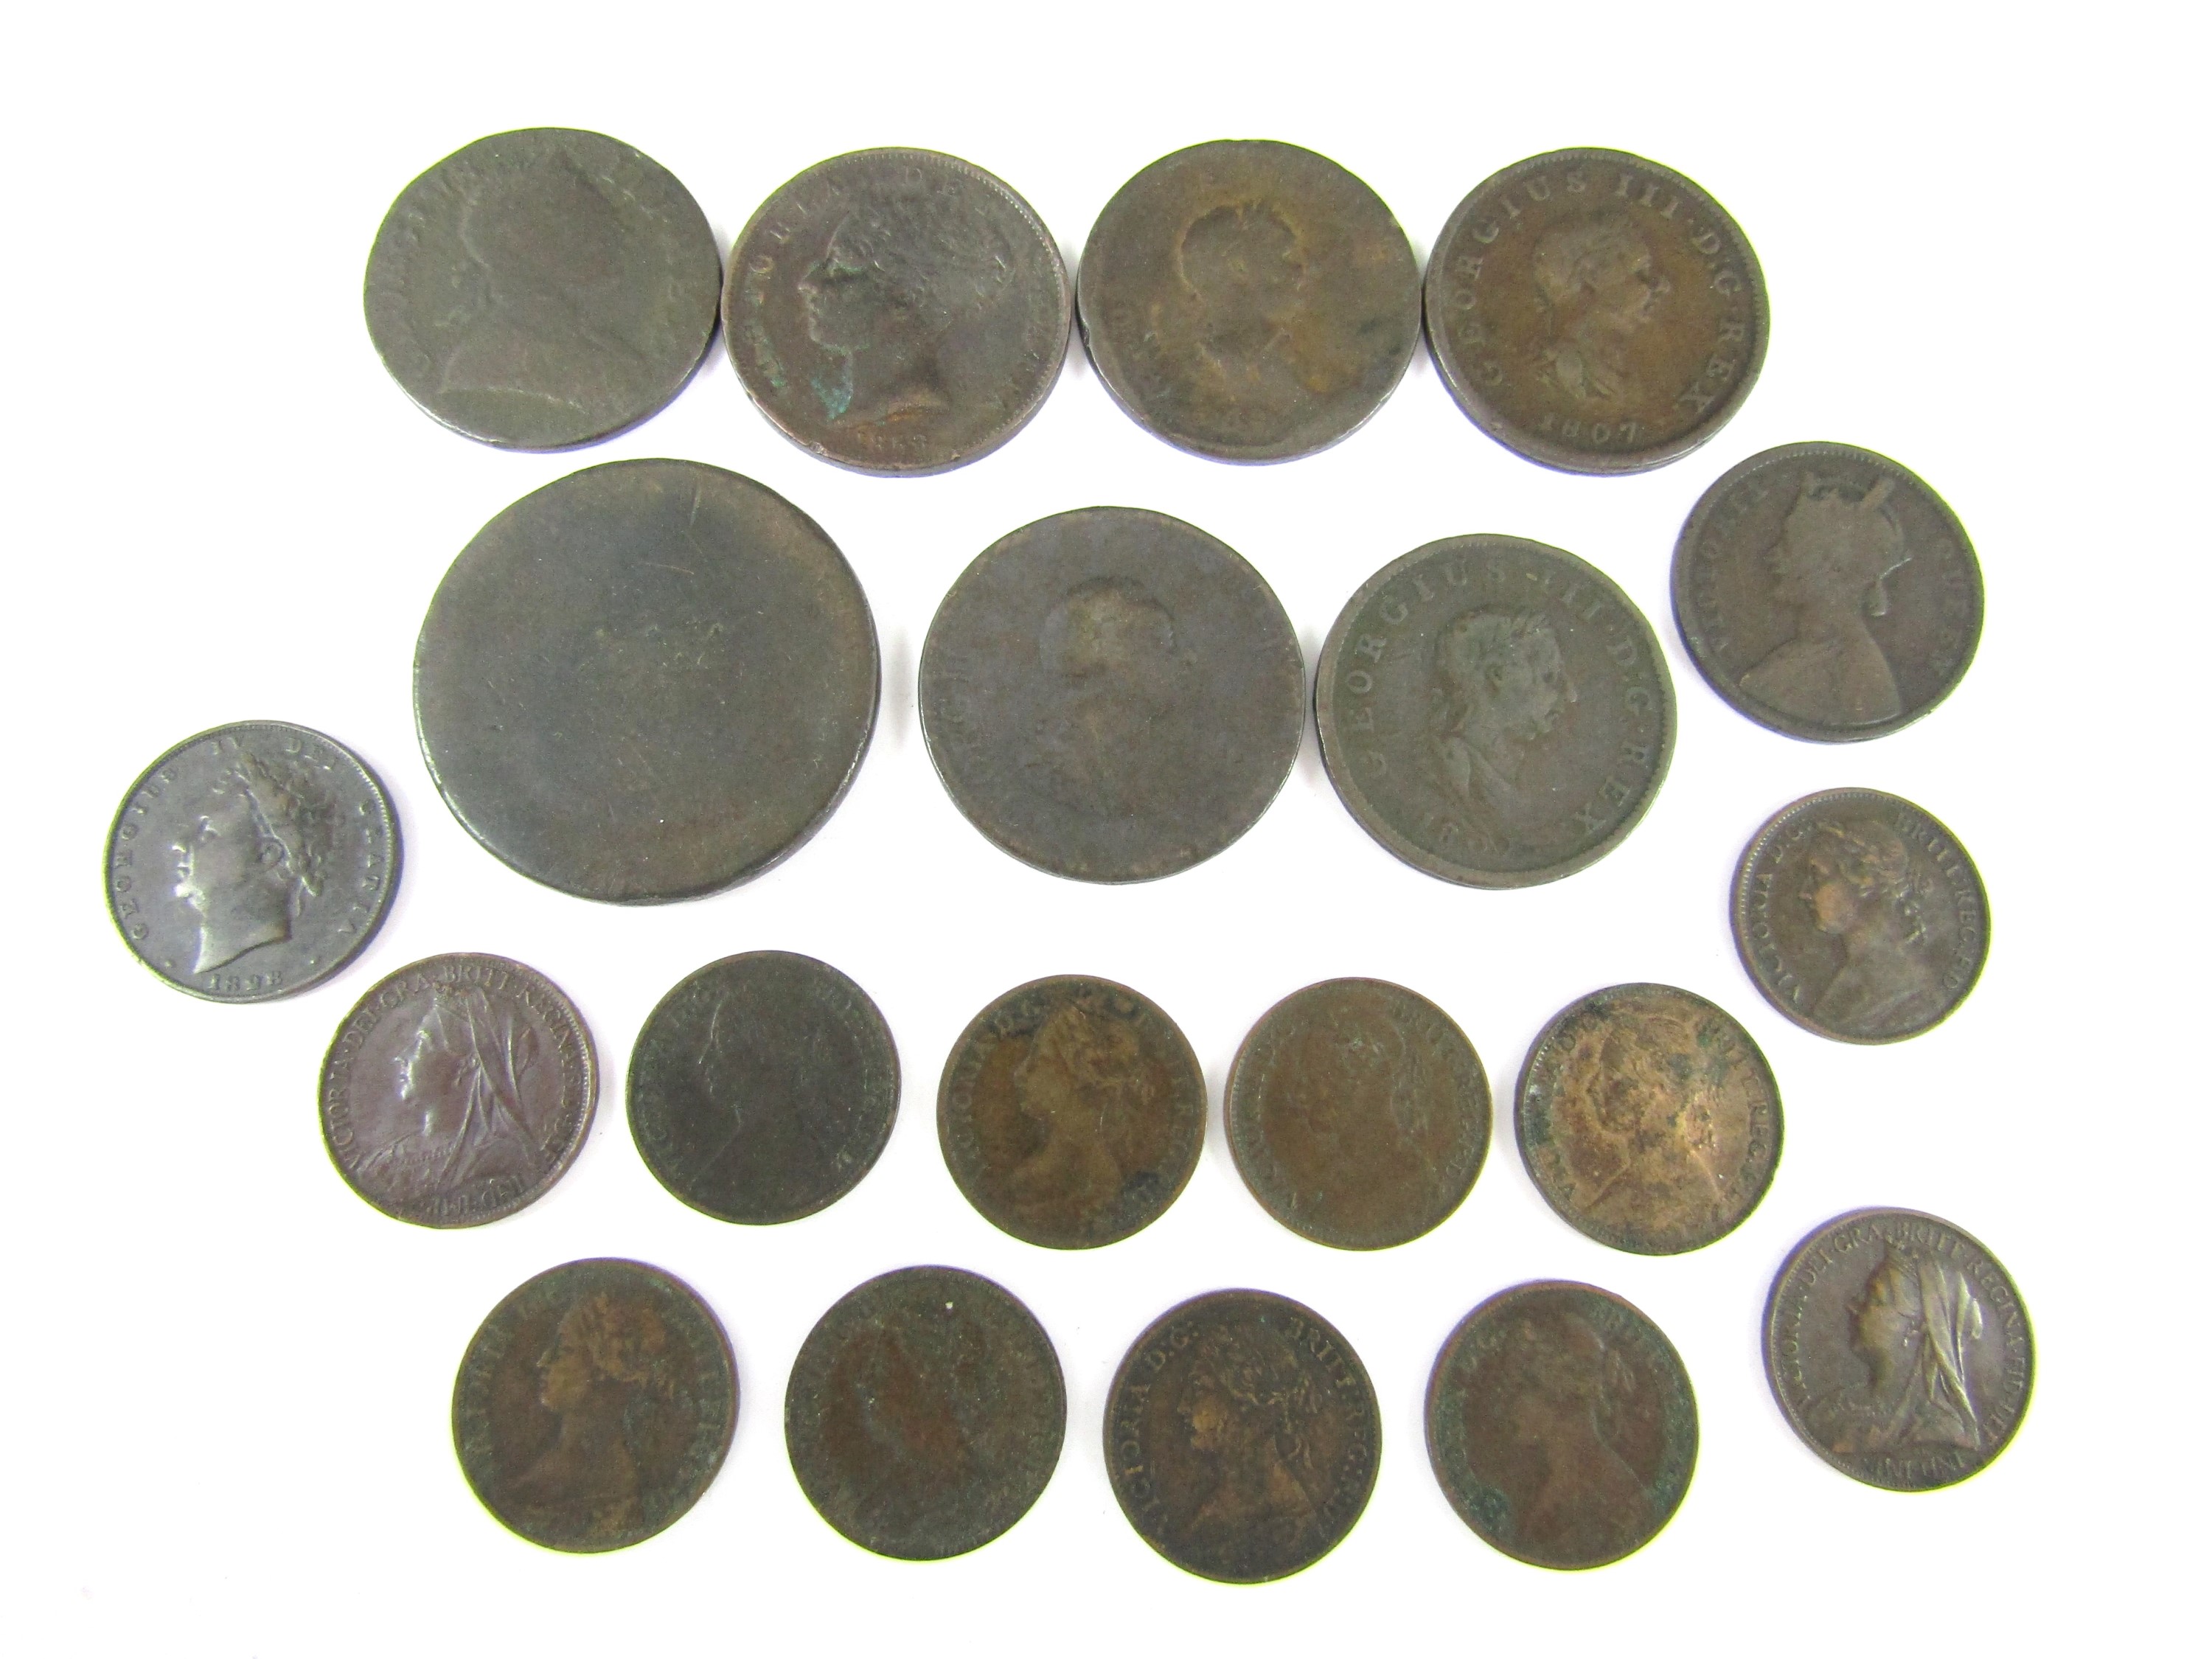 Sundry Georgian and Victorian copper coins